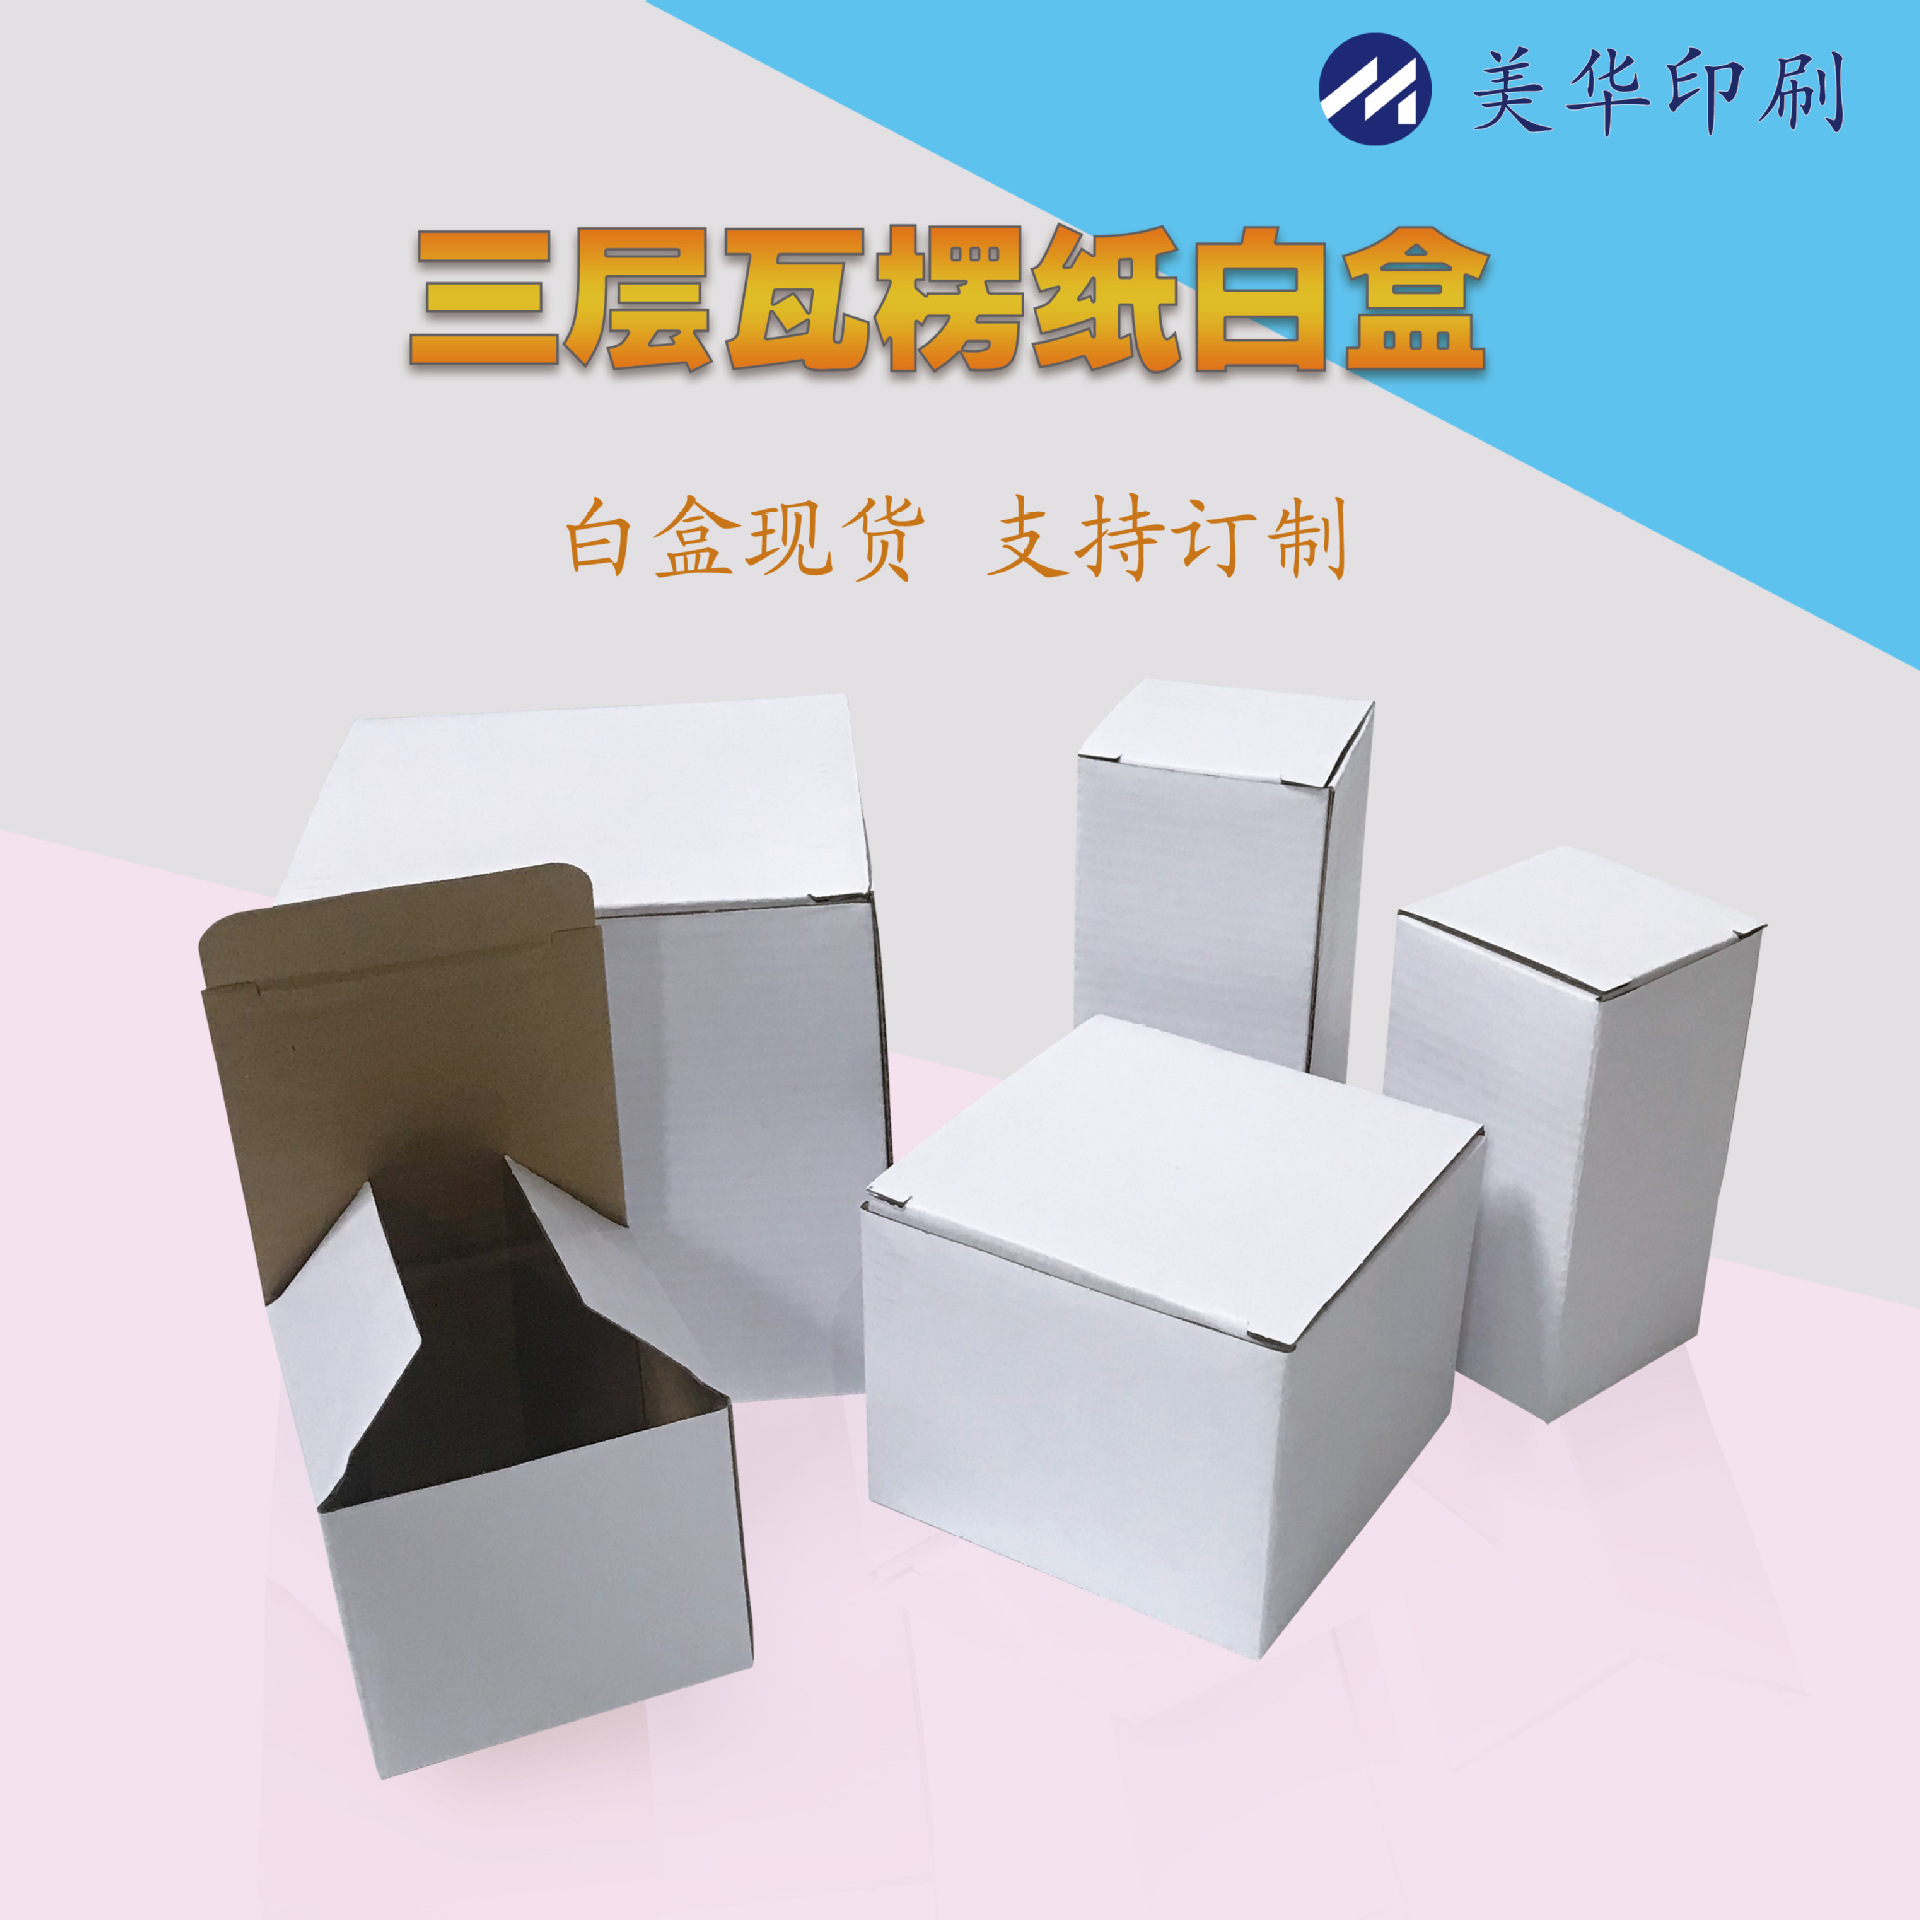 White Box goods in stock Corrugated boxes glass Packaging box led lamps and lanterns Box white neutral Printing Customize Customized